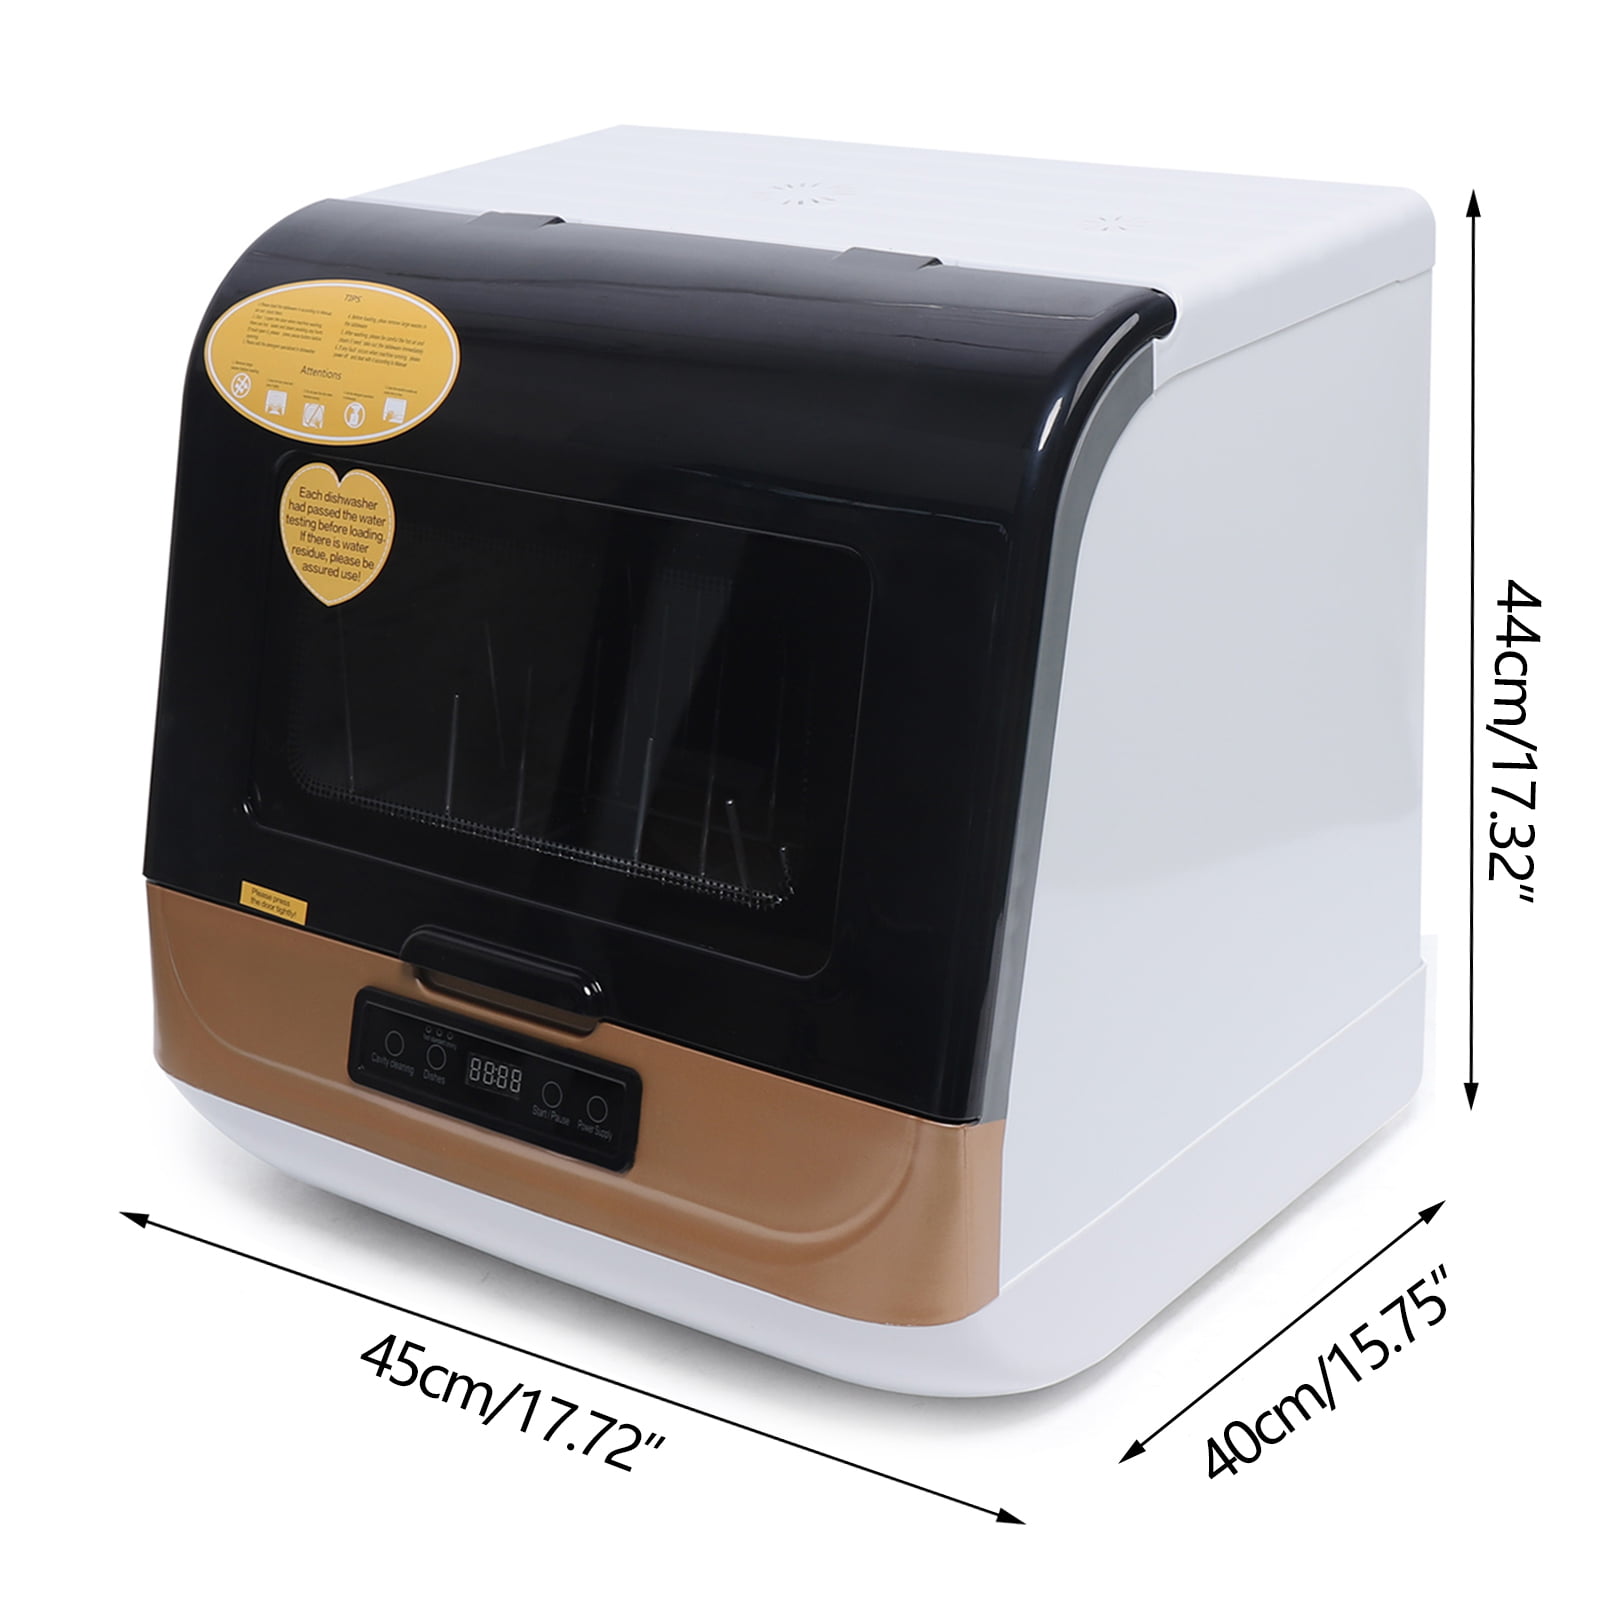 Portable Countertop Dishwasher Compact Home Automatic Mini Dishwasher for  Apartments Dormitories Offices Boats RVs Kitchens - AliExpress